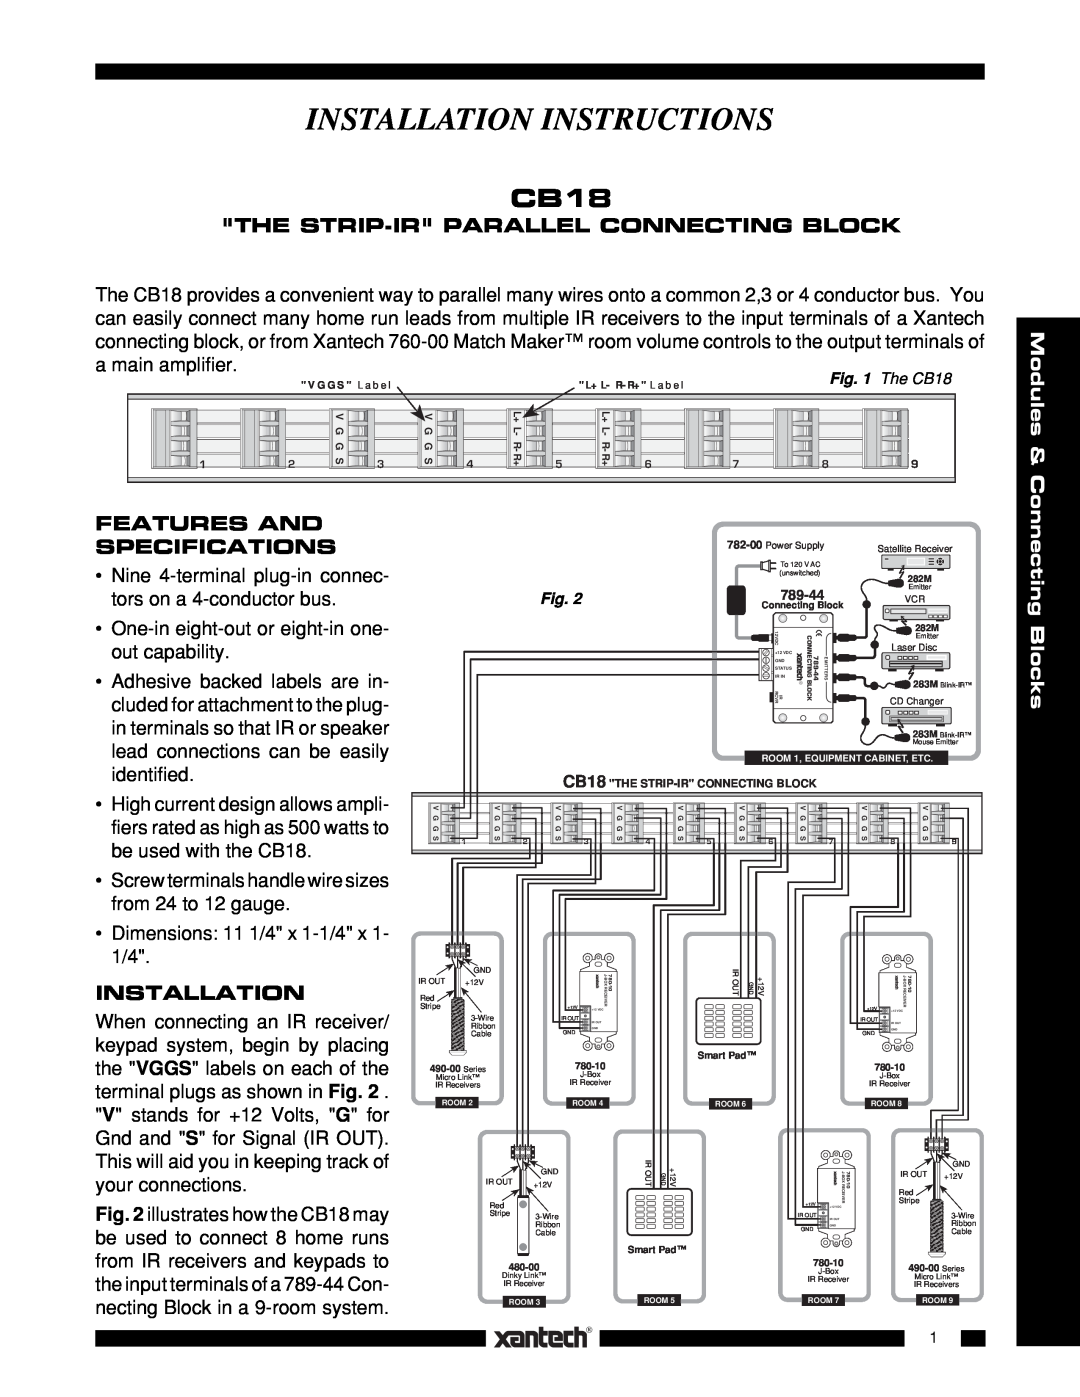 Xantech CB18 installation instructions The Strip-Irparallel Connecting Block, Features And Specifications, Installation 